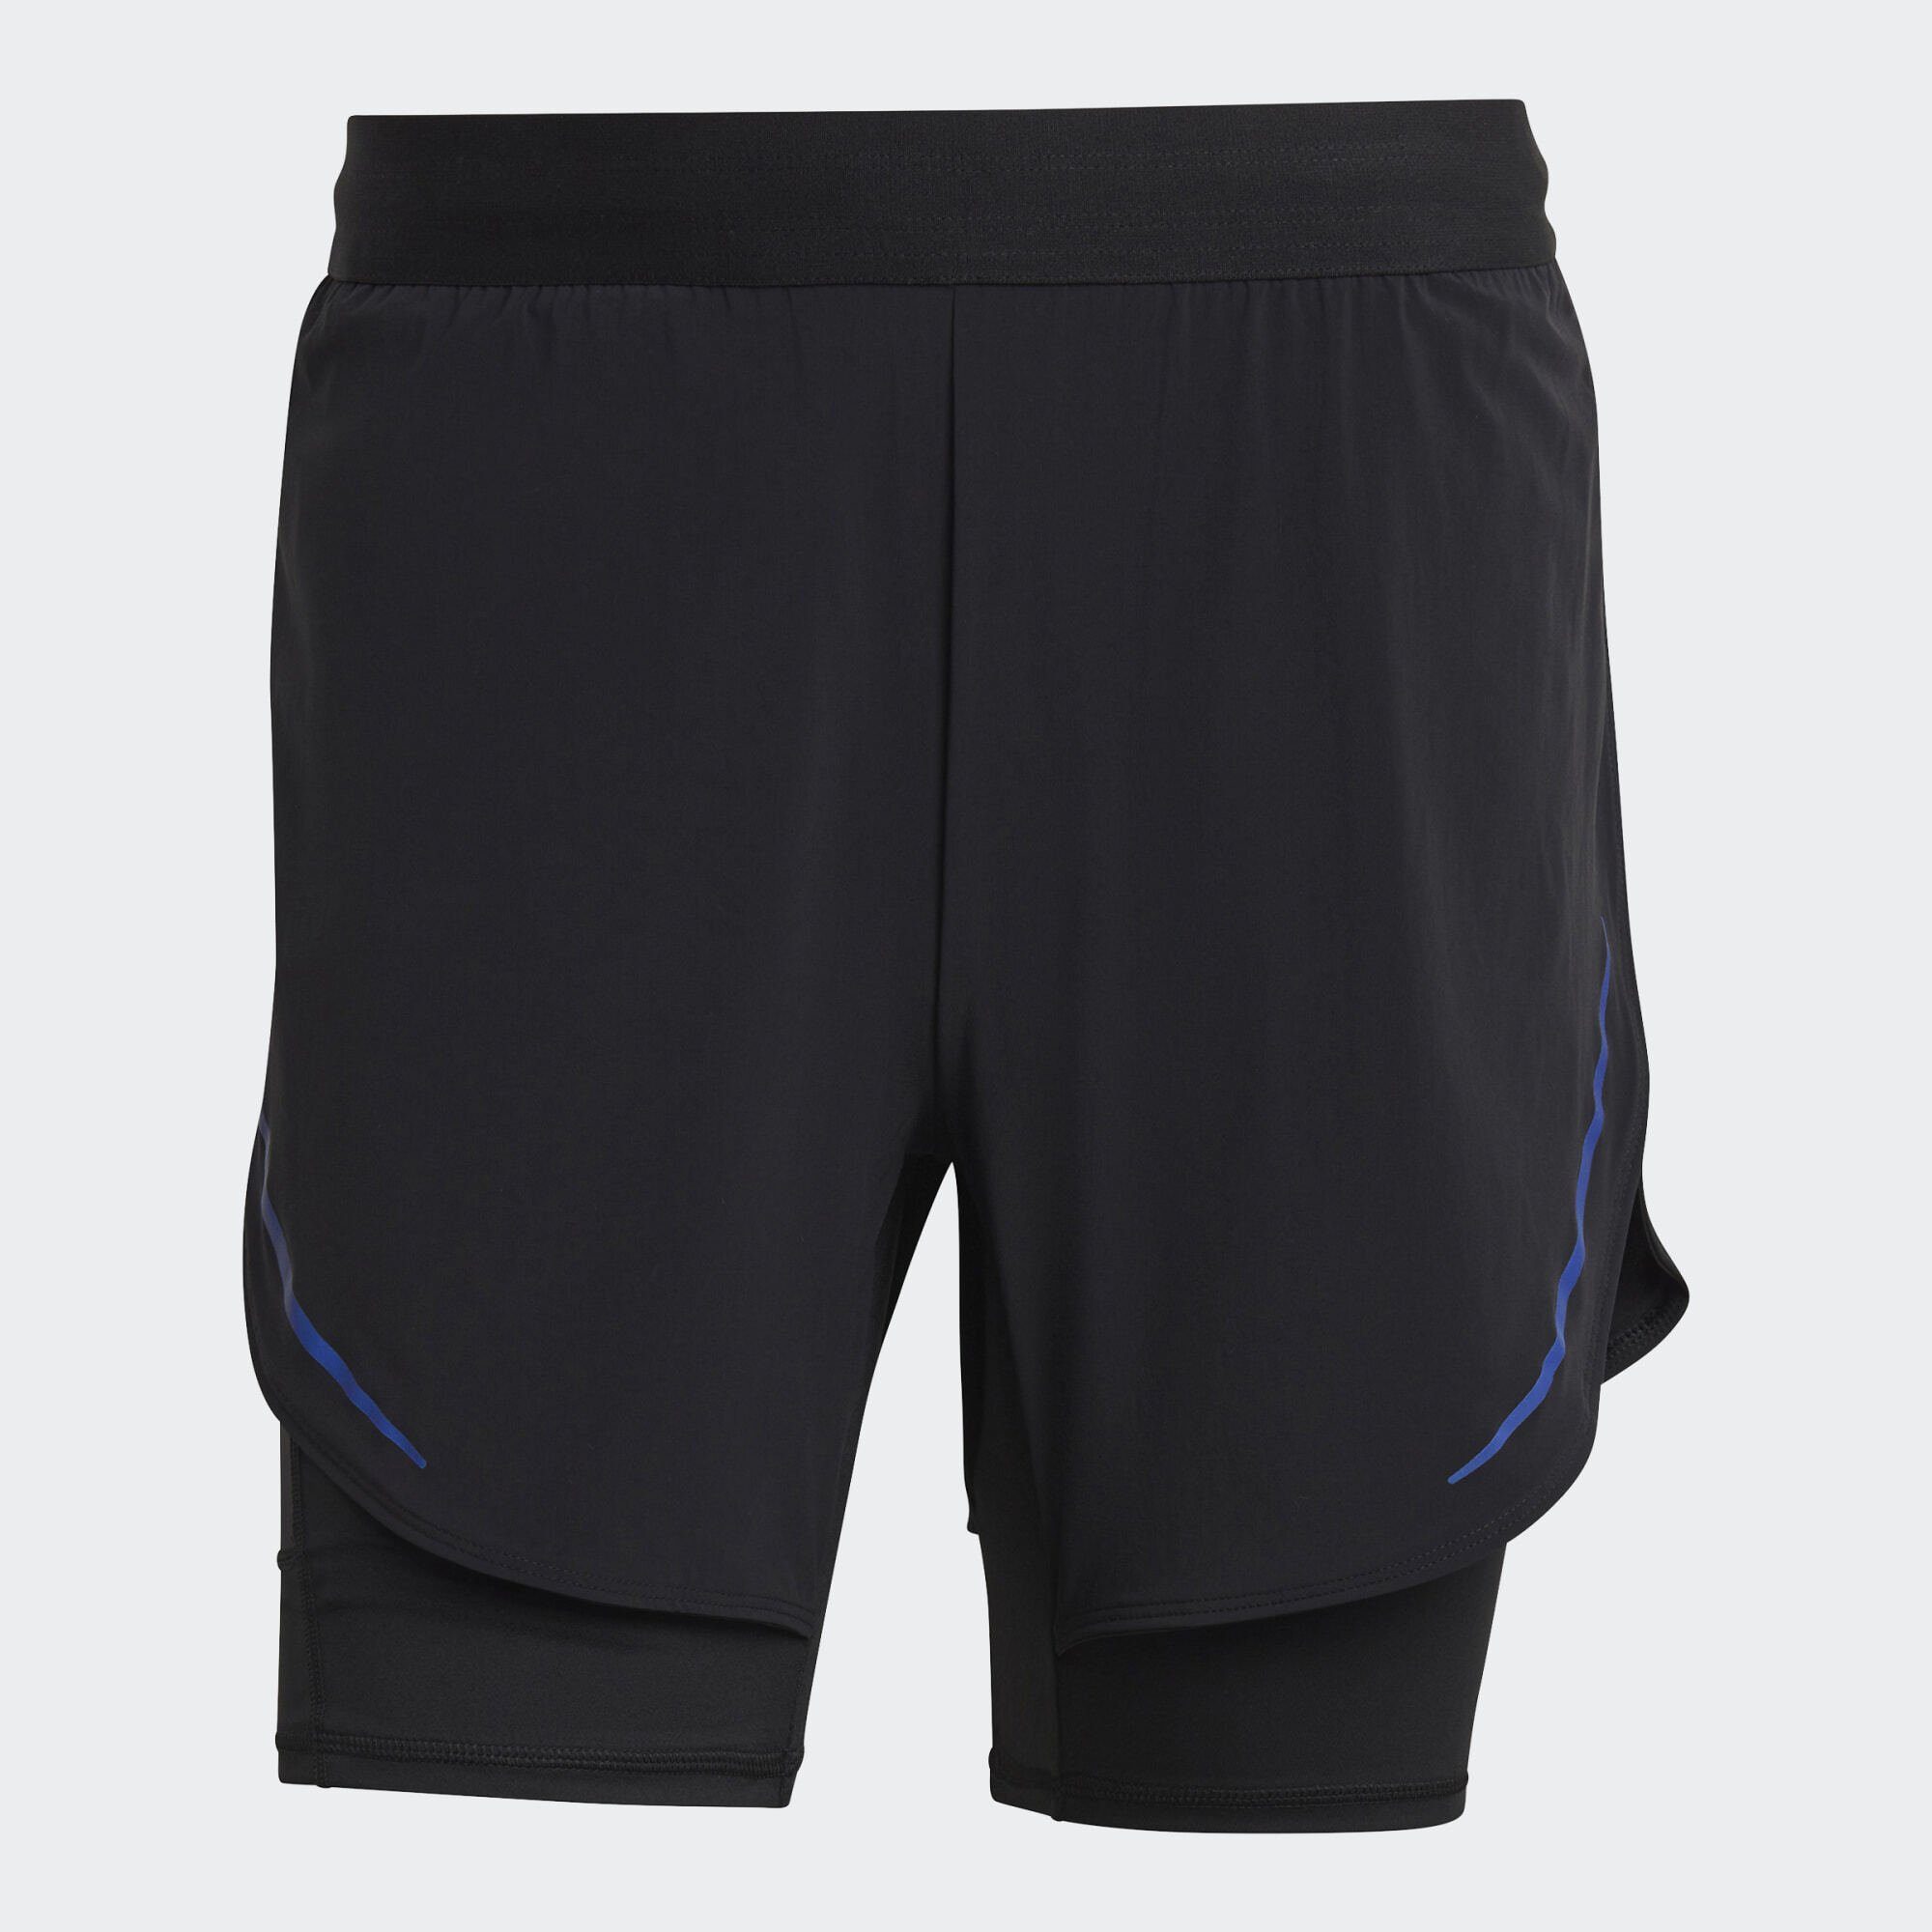 HIIT HEAT.RDY TRAINING adidas 2-IN-1 Performance Black 2-in-1-Shorts SHORTS